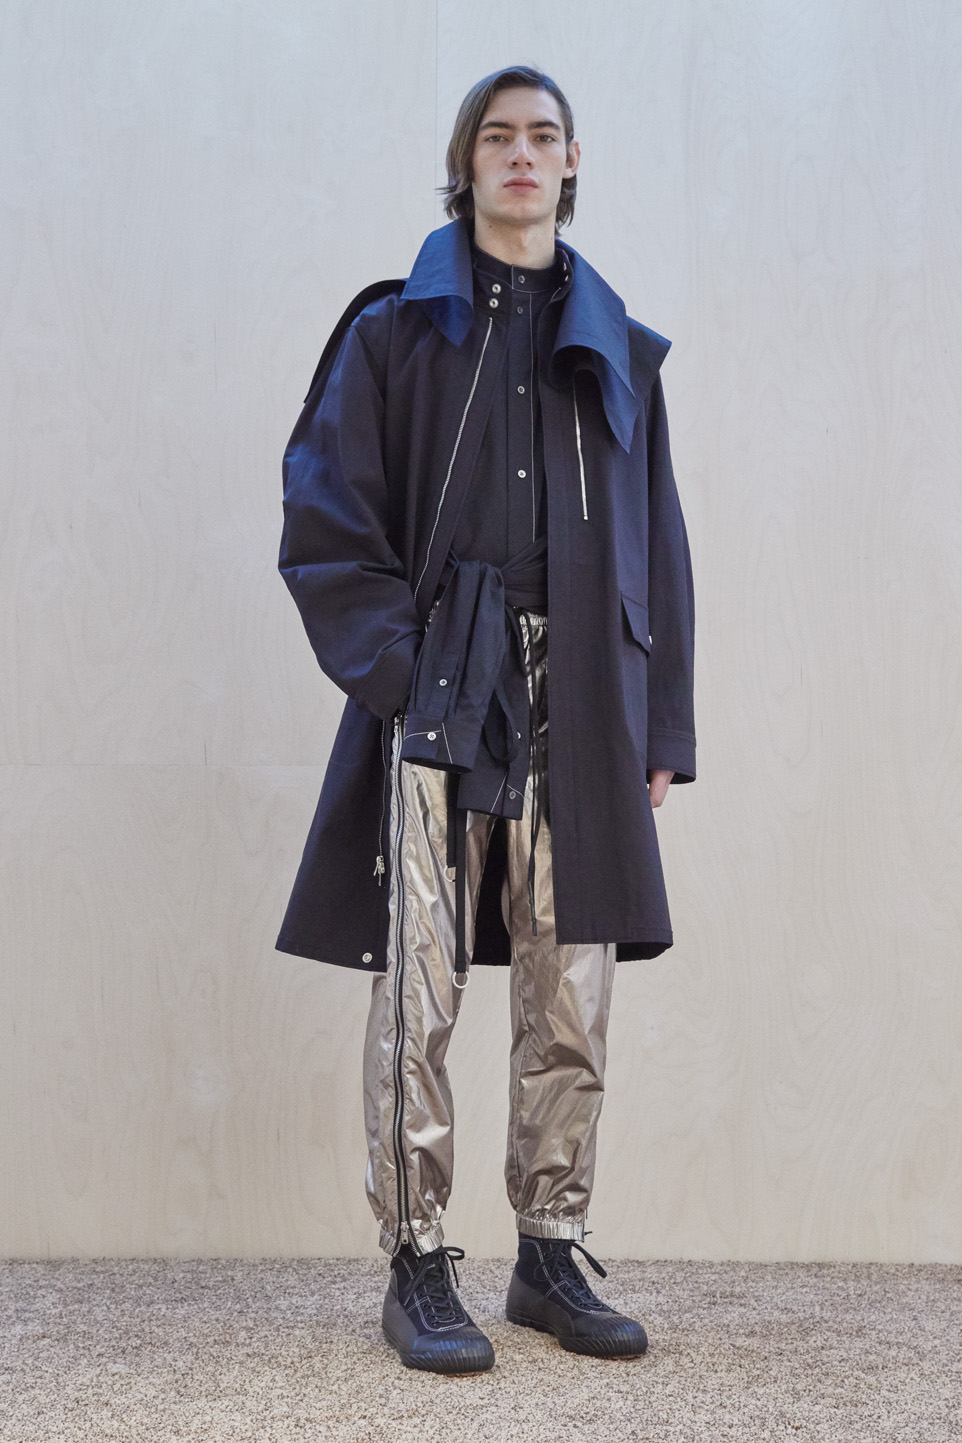 Plim FW19 Mens Collections Lores 06 3.1 phillip lim fall 2019